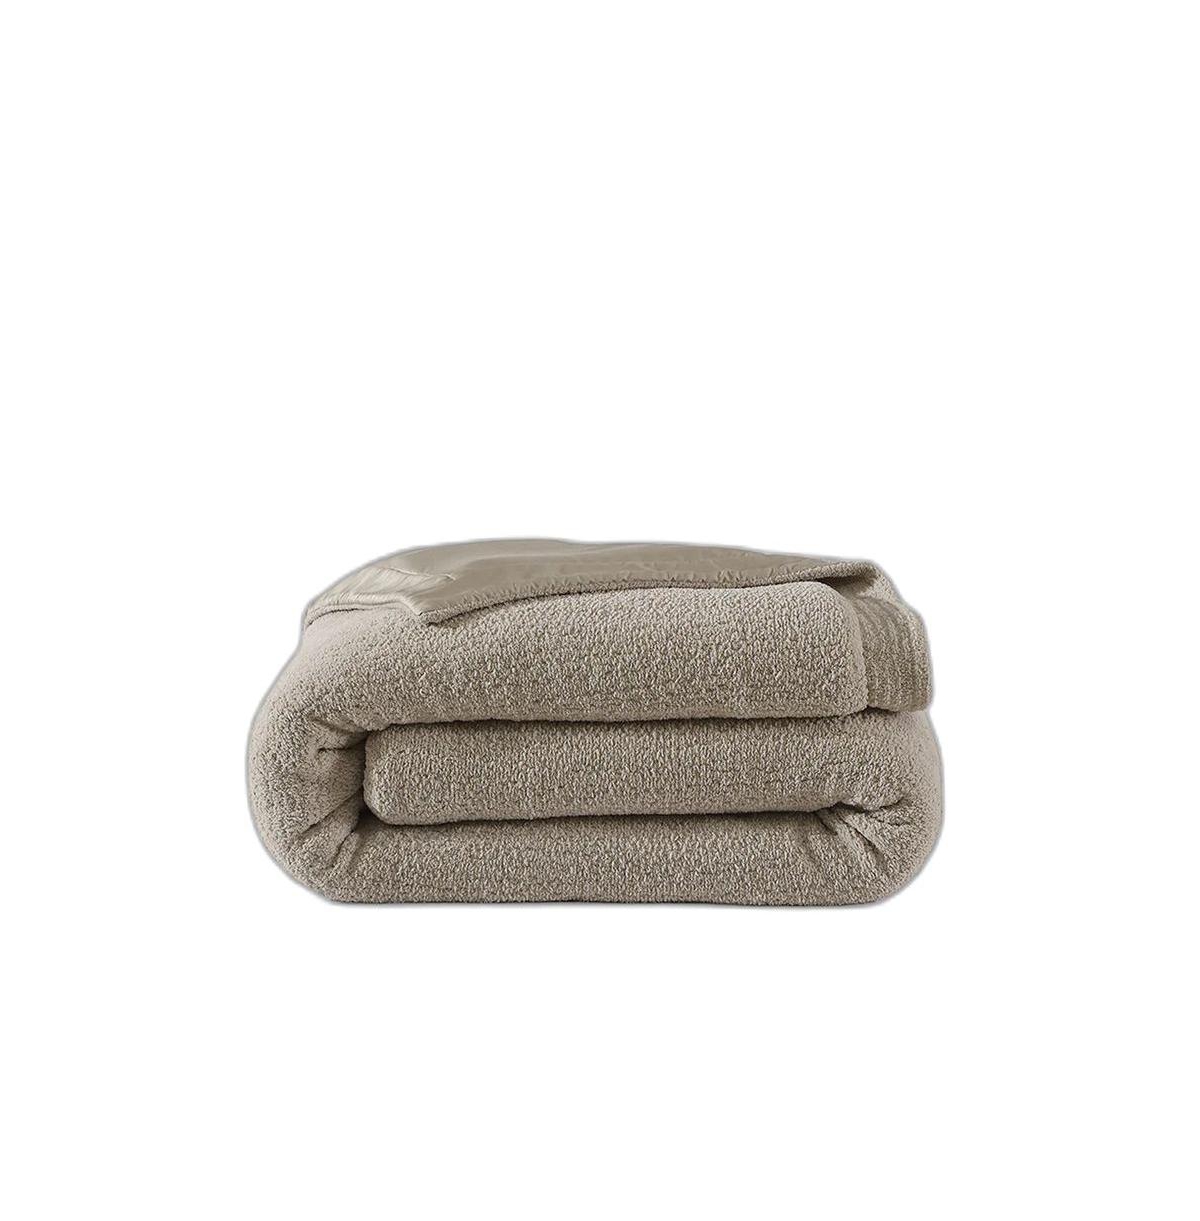 Sunday Citizen Snug Viscose From Bamboo Duvet Cover, King In Taupe